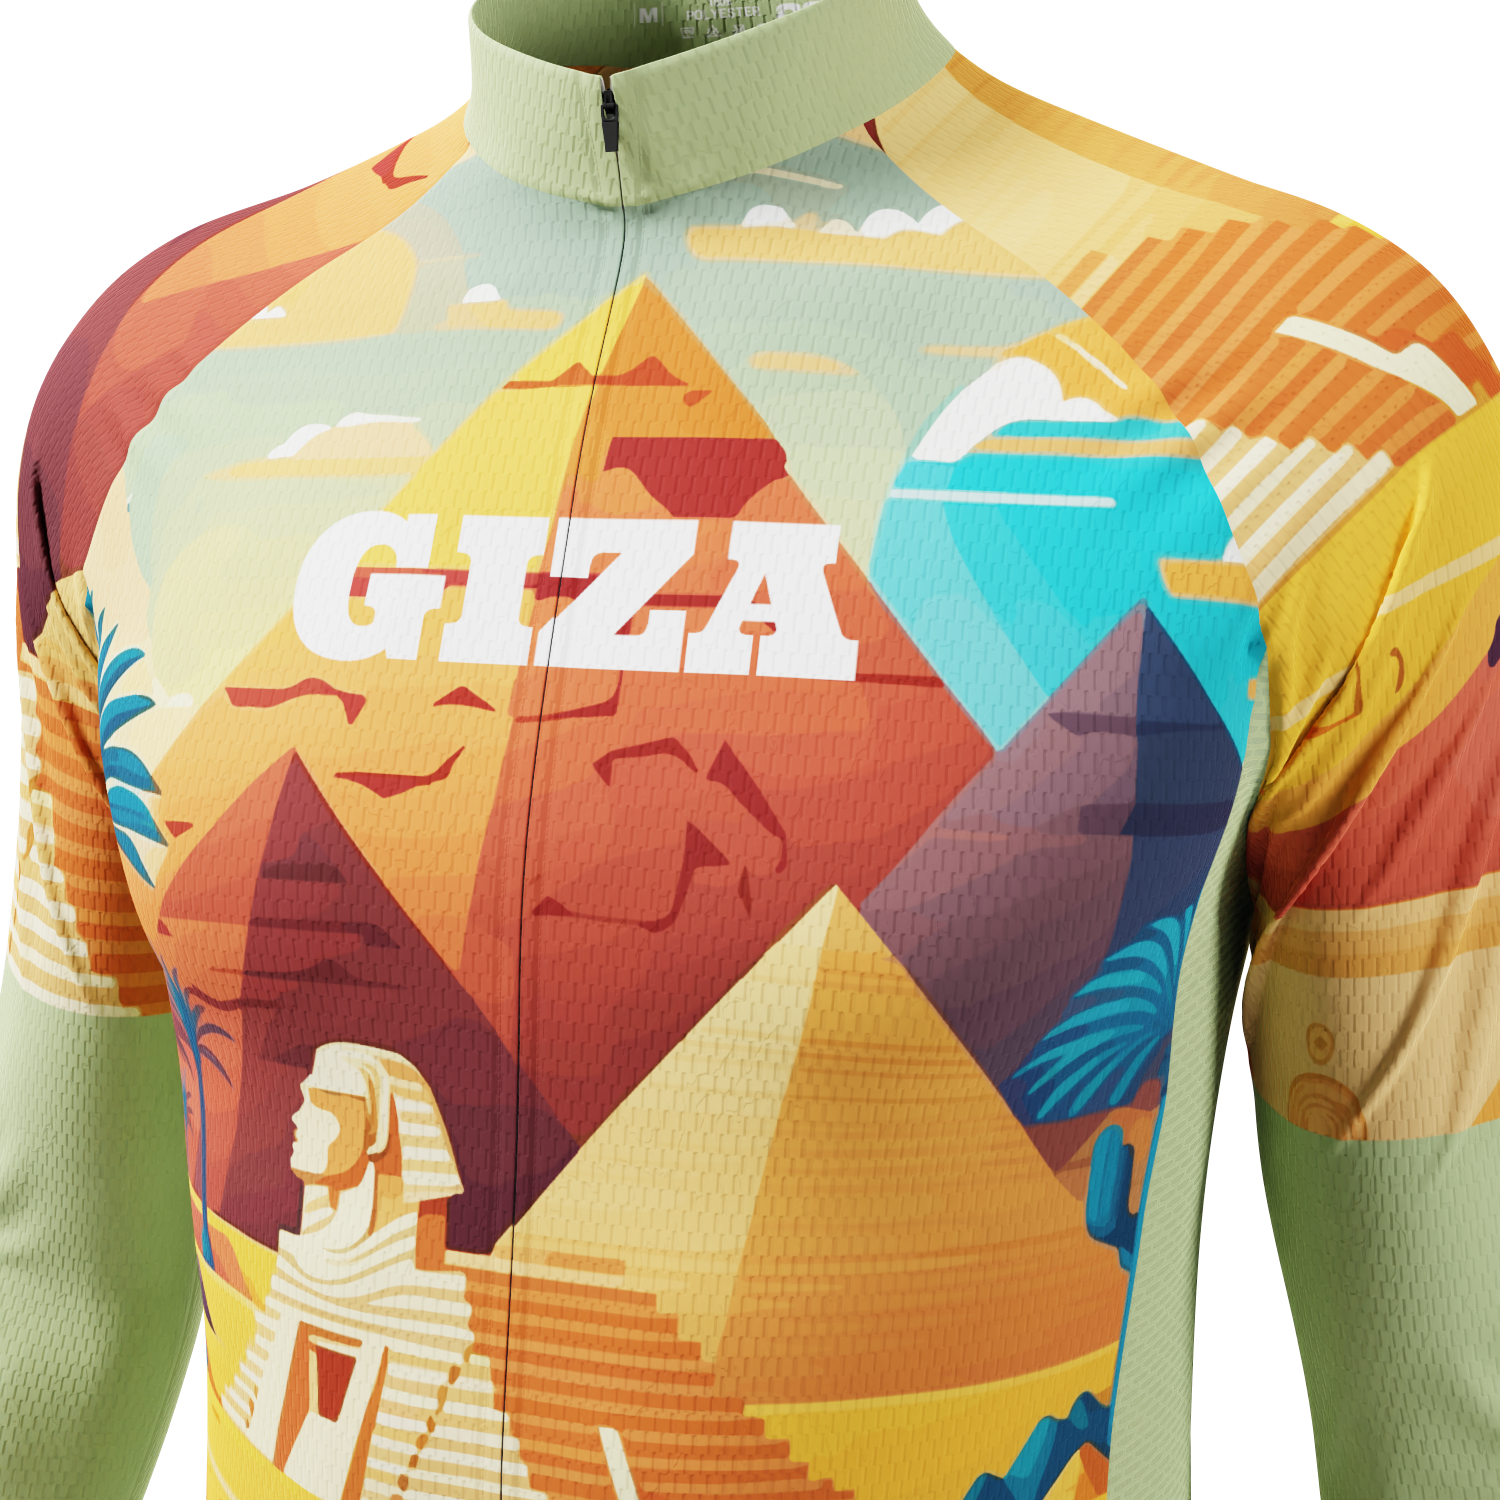 Men's Around The World - Giza Long Sleeve Cycling Jersey